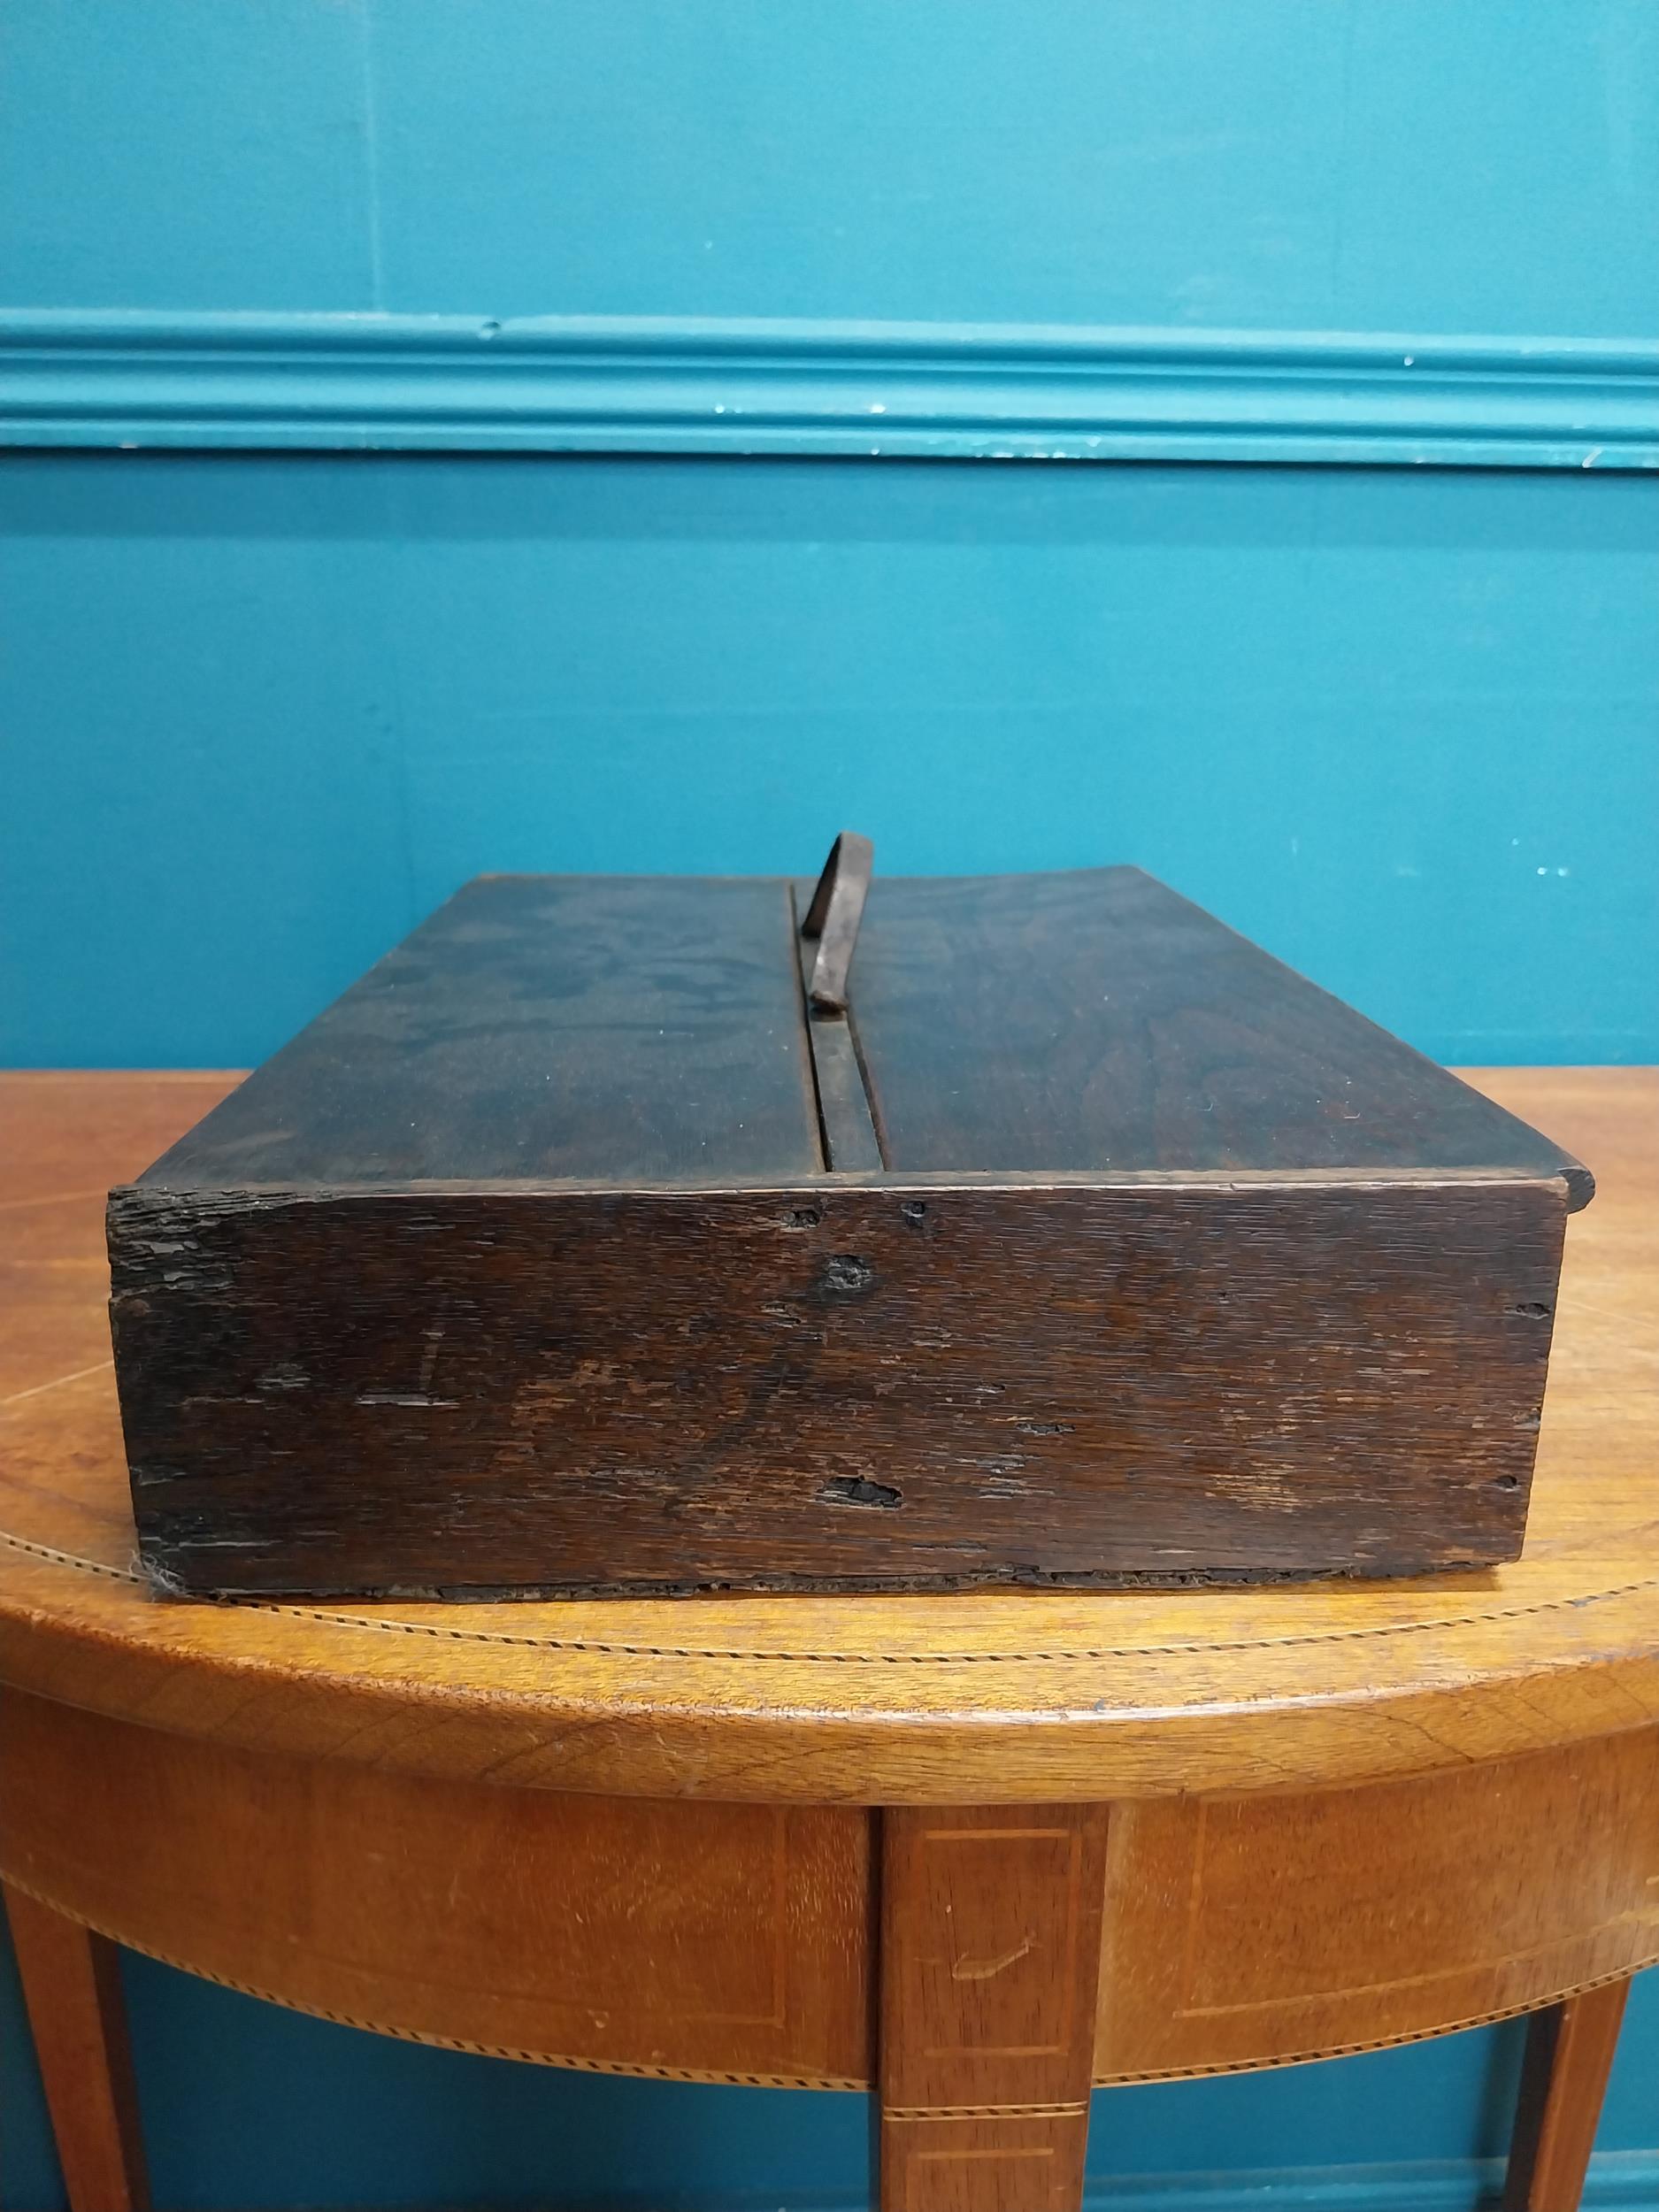 19th C. mahogany cutlery box with metal handle. {12 cm H x 20 cm W x 14 cm D}. - Image 4 of 6